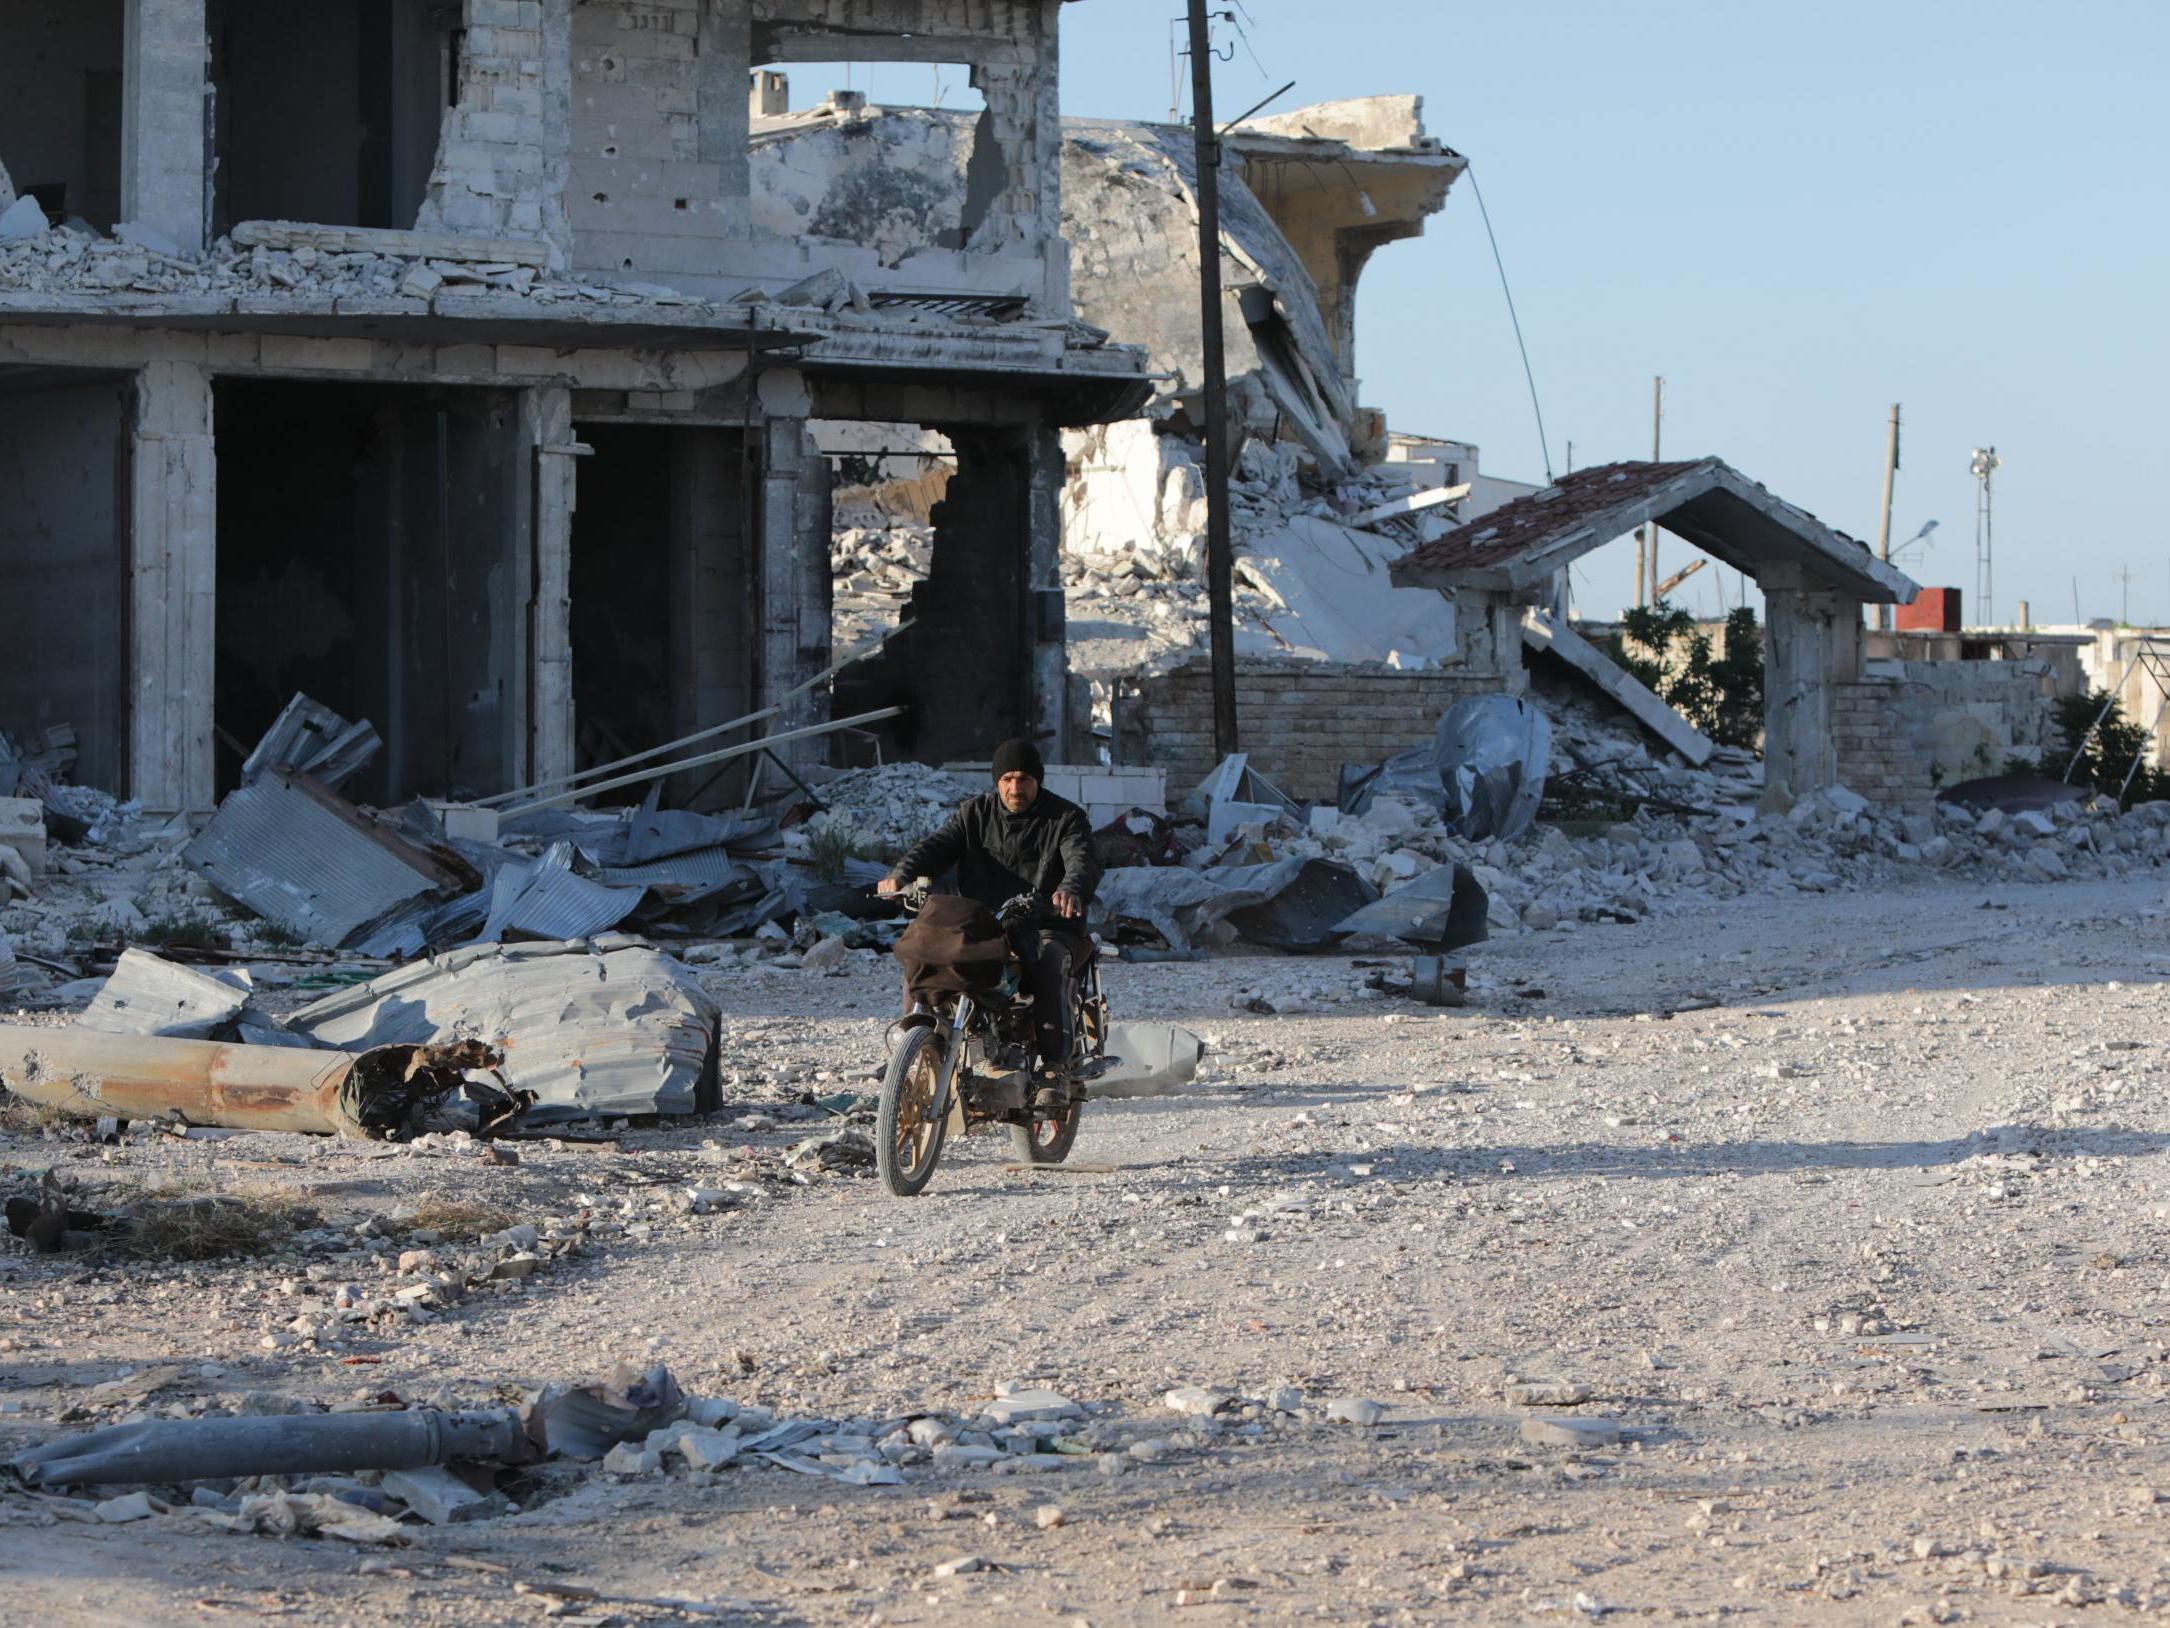 A Syrian man rides his motorcycle in a town ravaged by attacks from pro-government forces in Idlib province